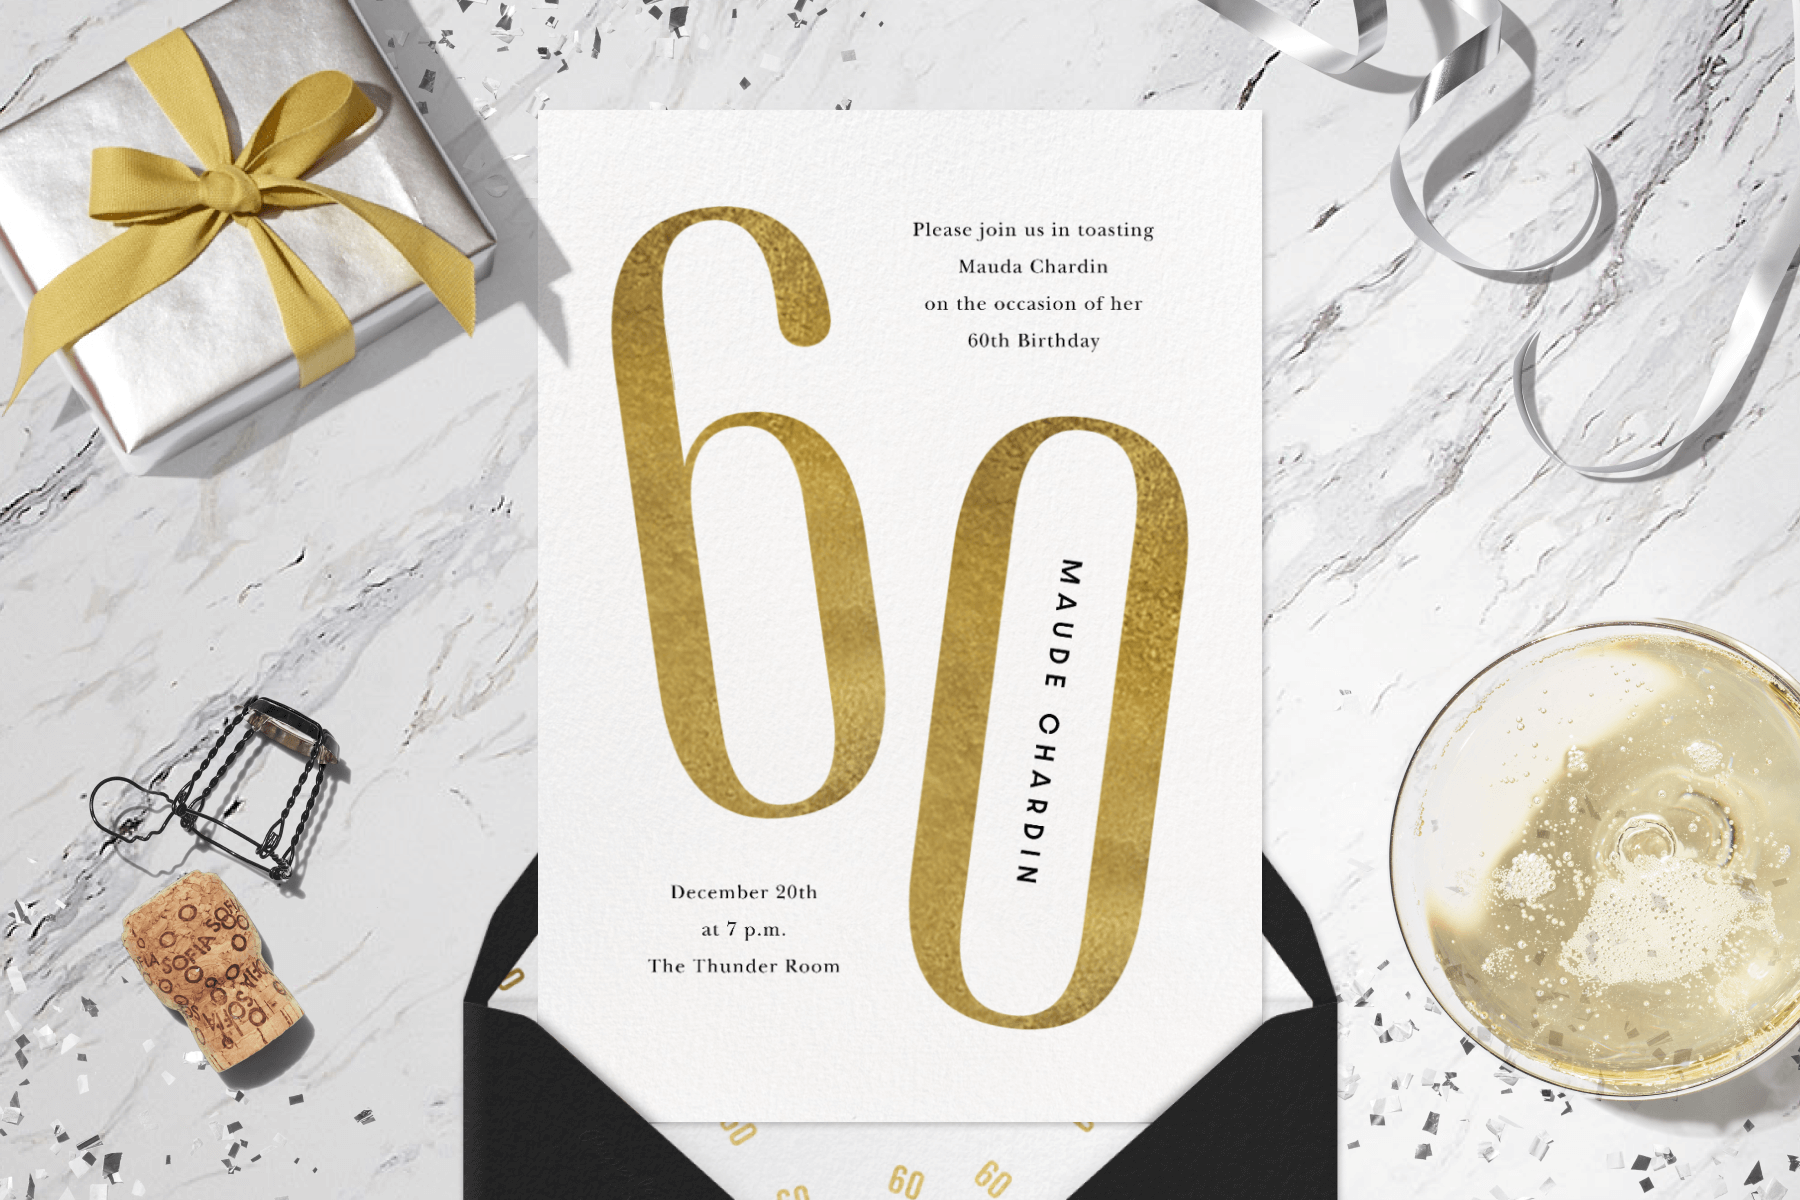 A 60th birthday invitation with a large gold 60, surrounded by a present, ribbon, a glass of Champagne, and a cork.